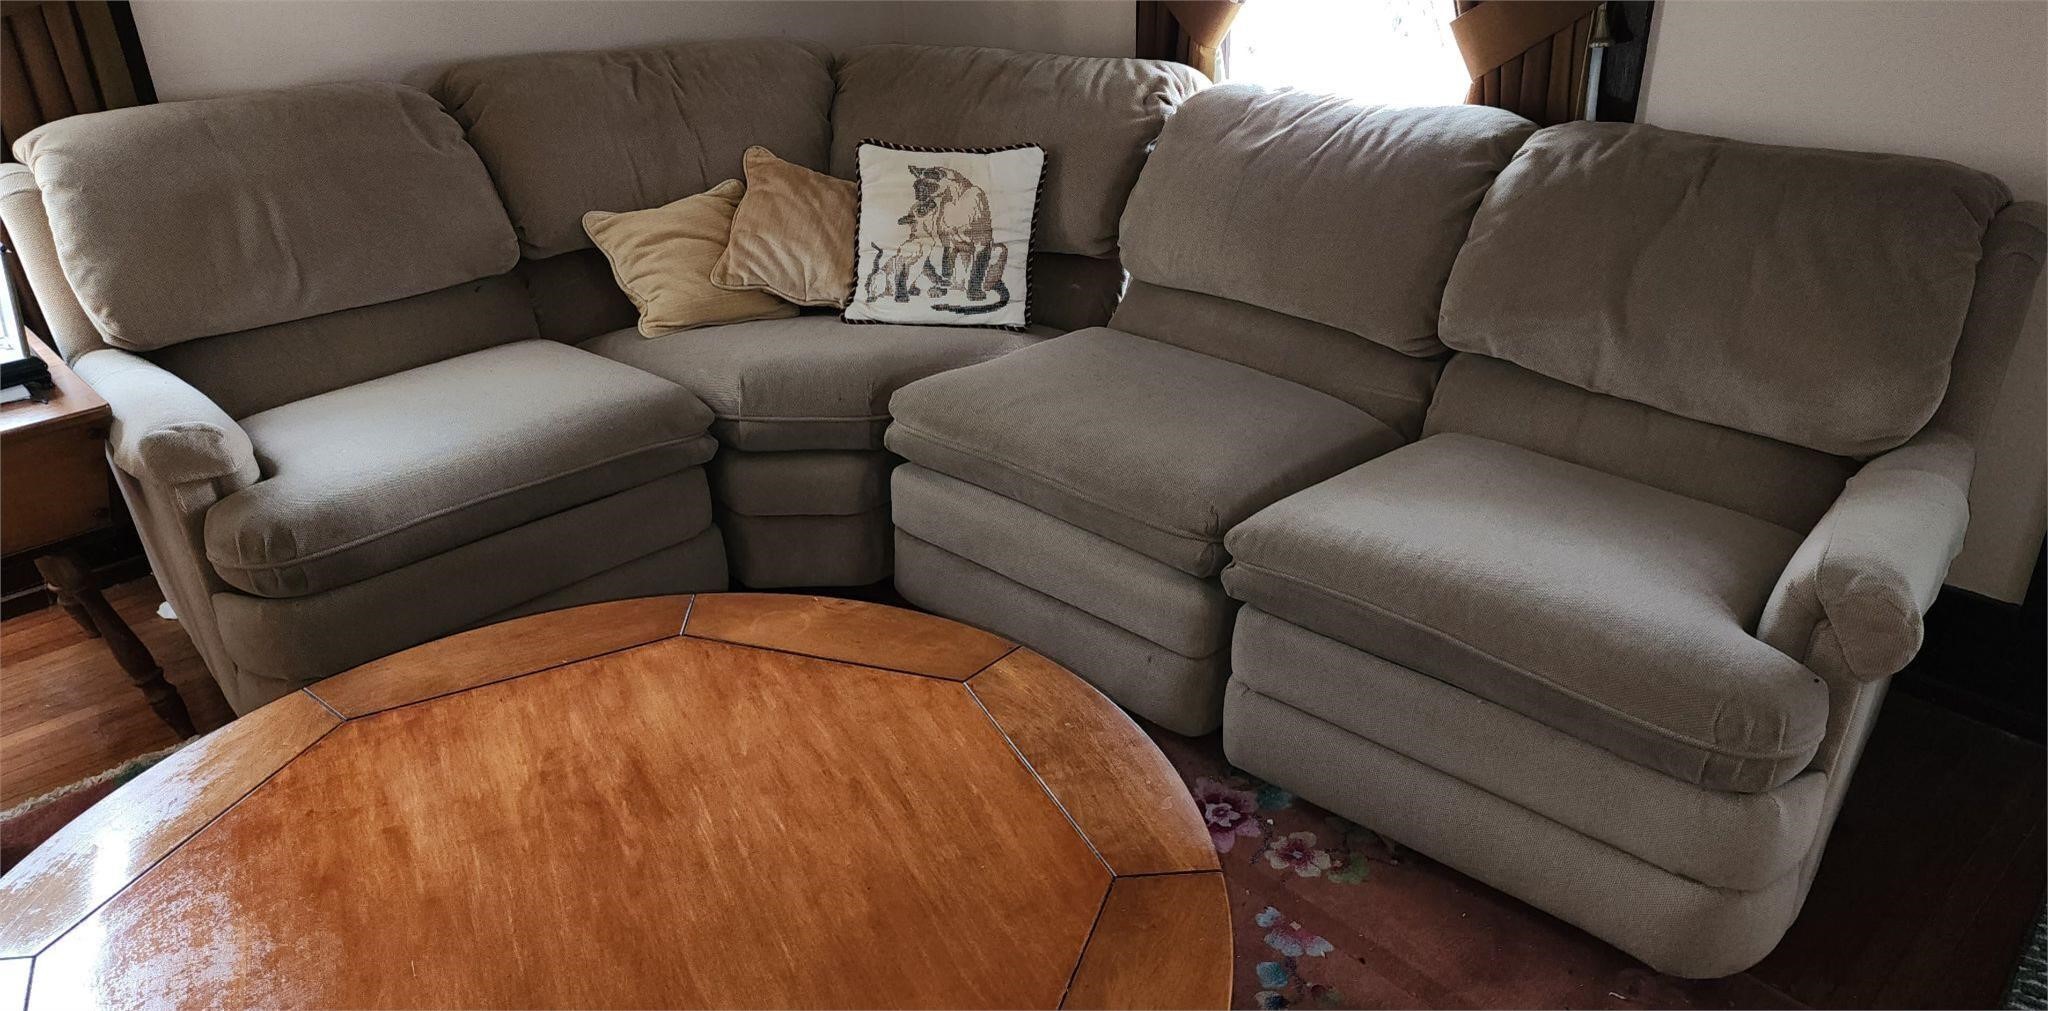 Barcalounger Four Piece Sectional Couch